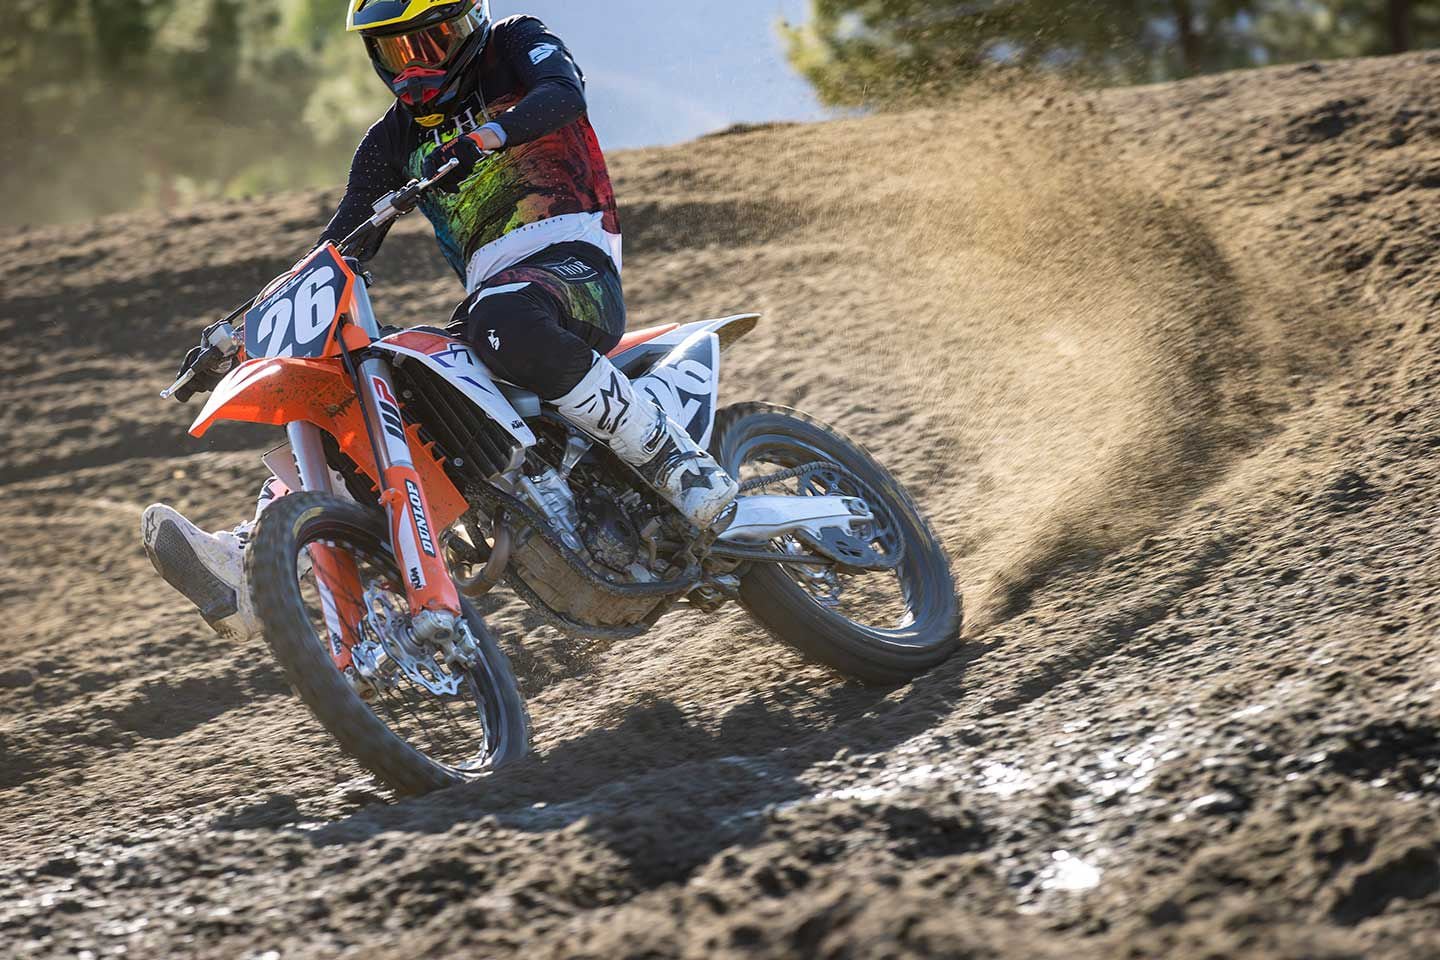 “The 250 SX-F is snappy off the bottom when riding around, but not as much so on the track. Its QS feature is cool and comes in handy when blasting up Glen Helen’s long start straightaway.” <i>—Ty Cullins</i>